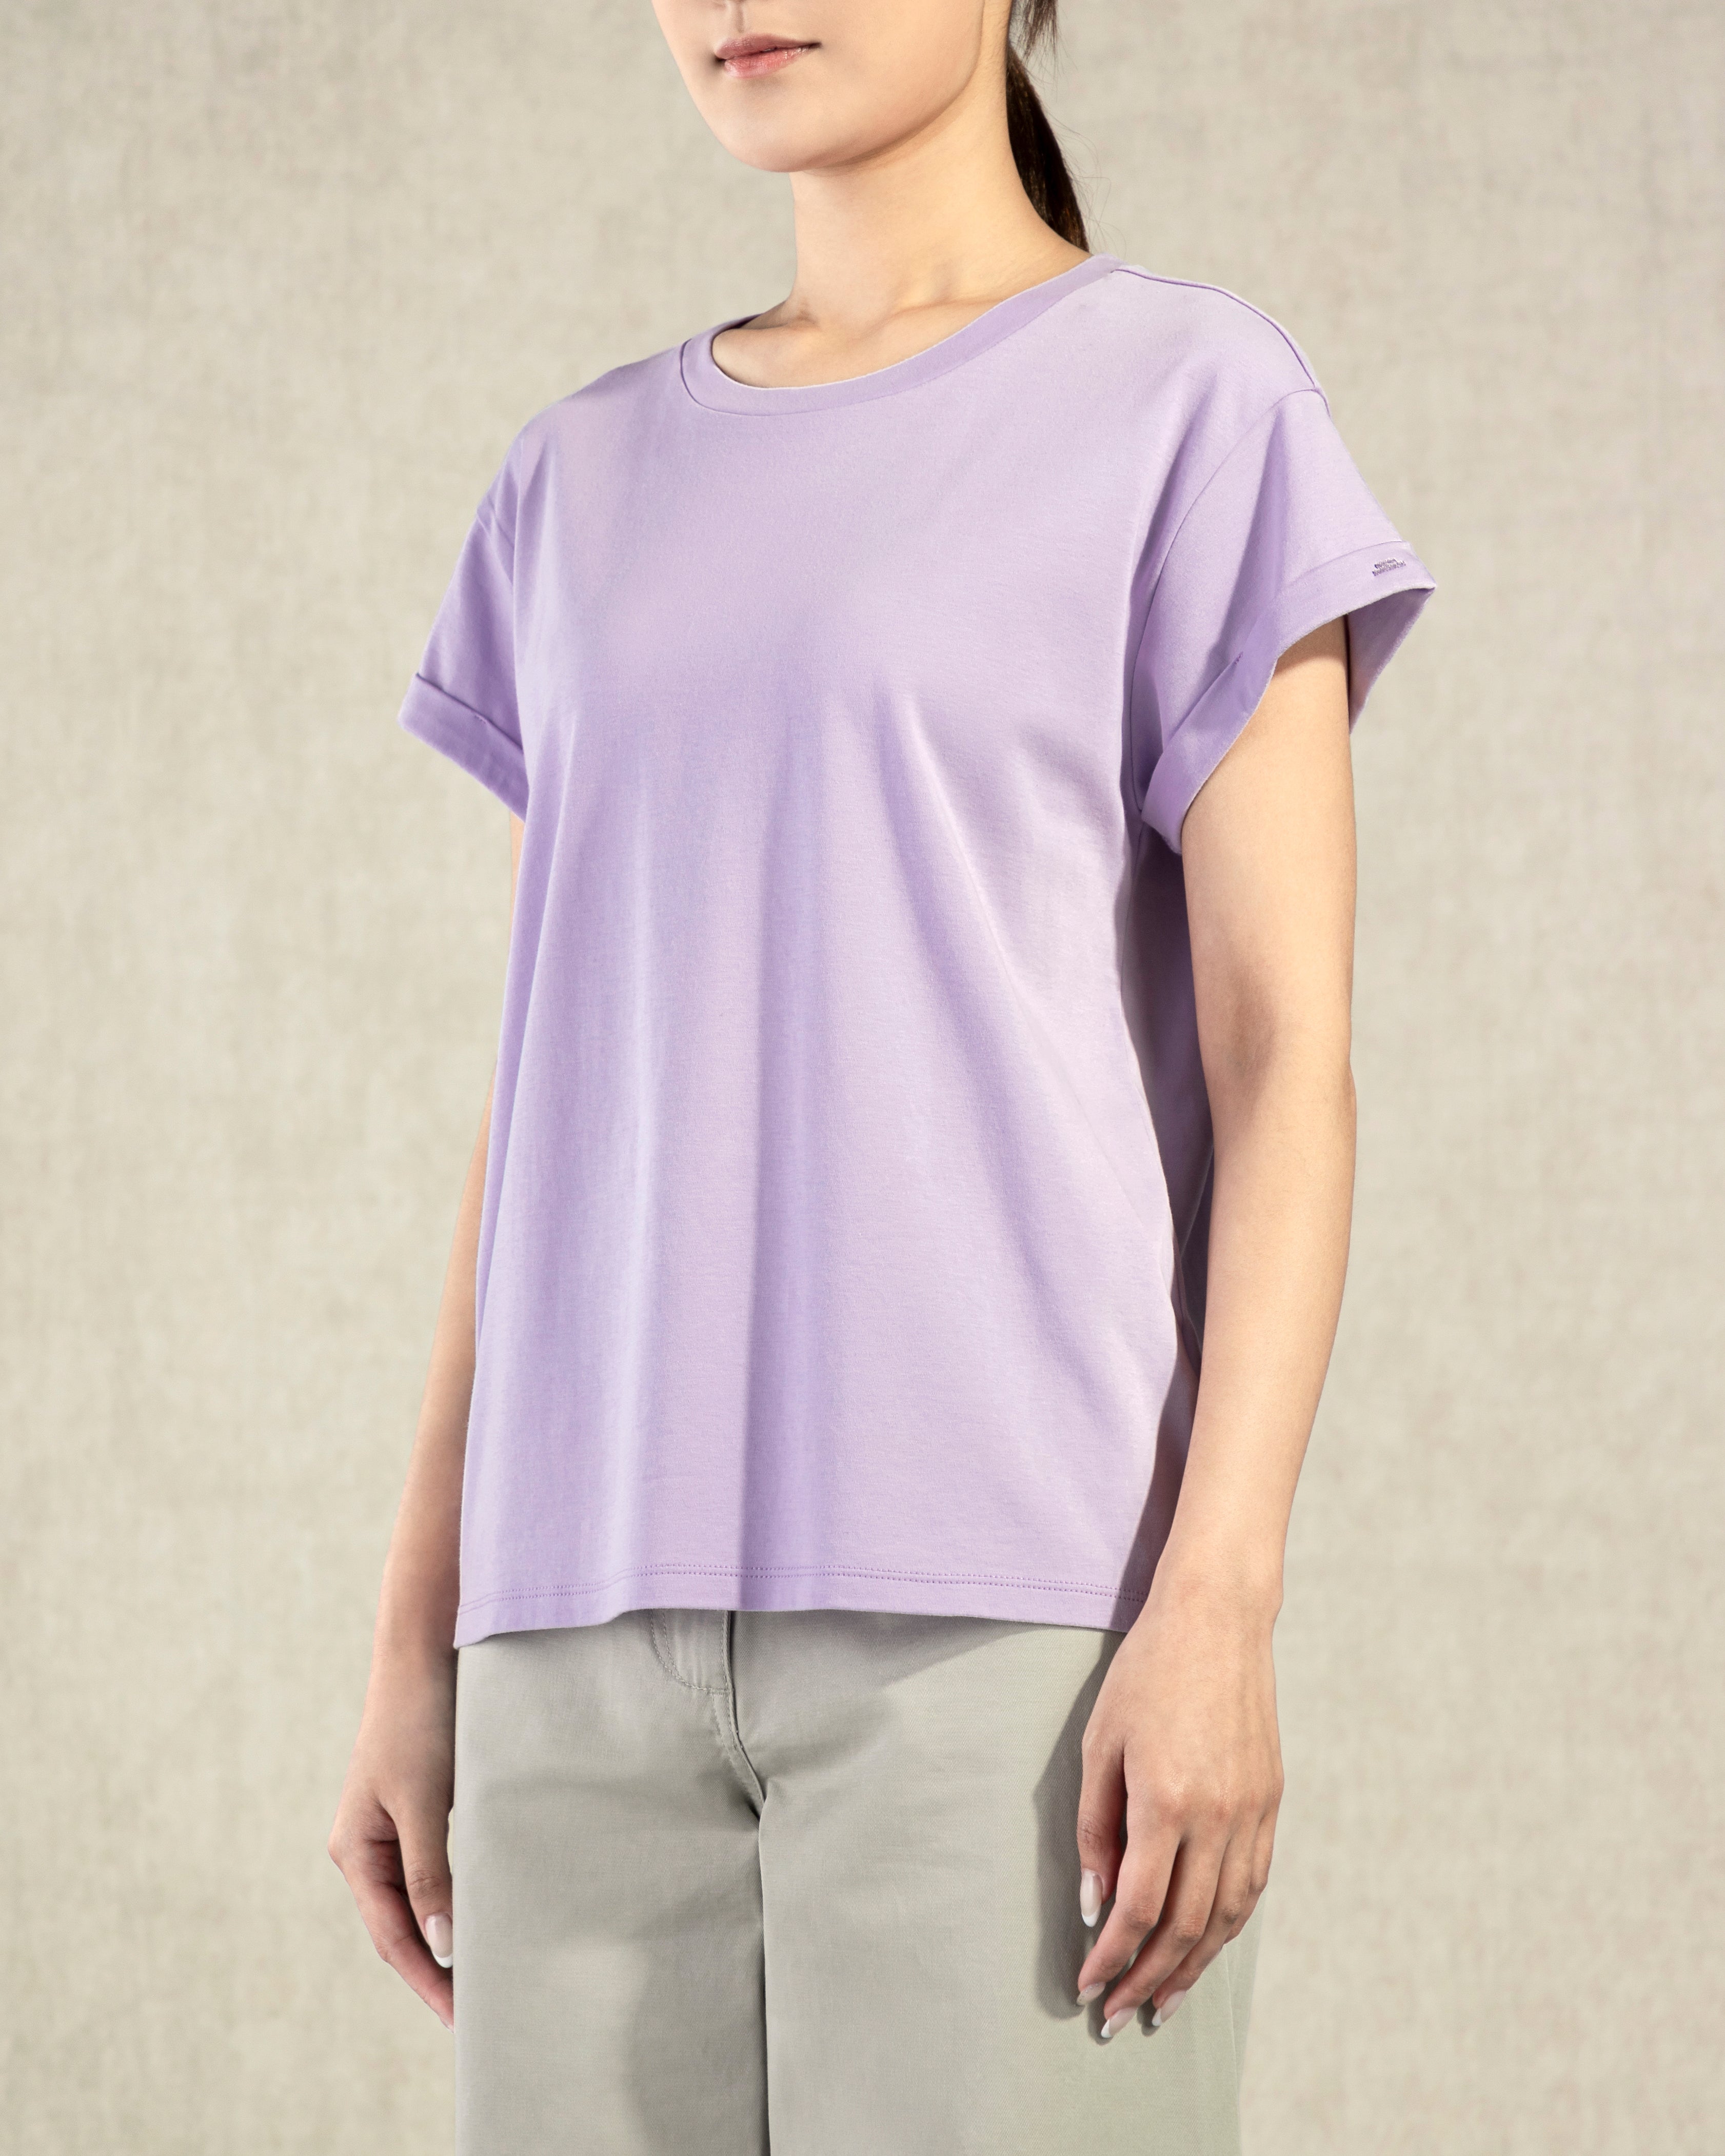 Pastel Lilac Rolled Sleeve Tee Womens Casual Summer Tee